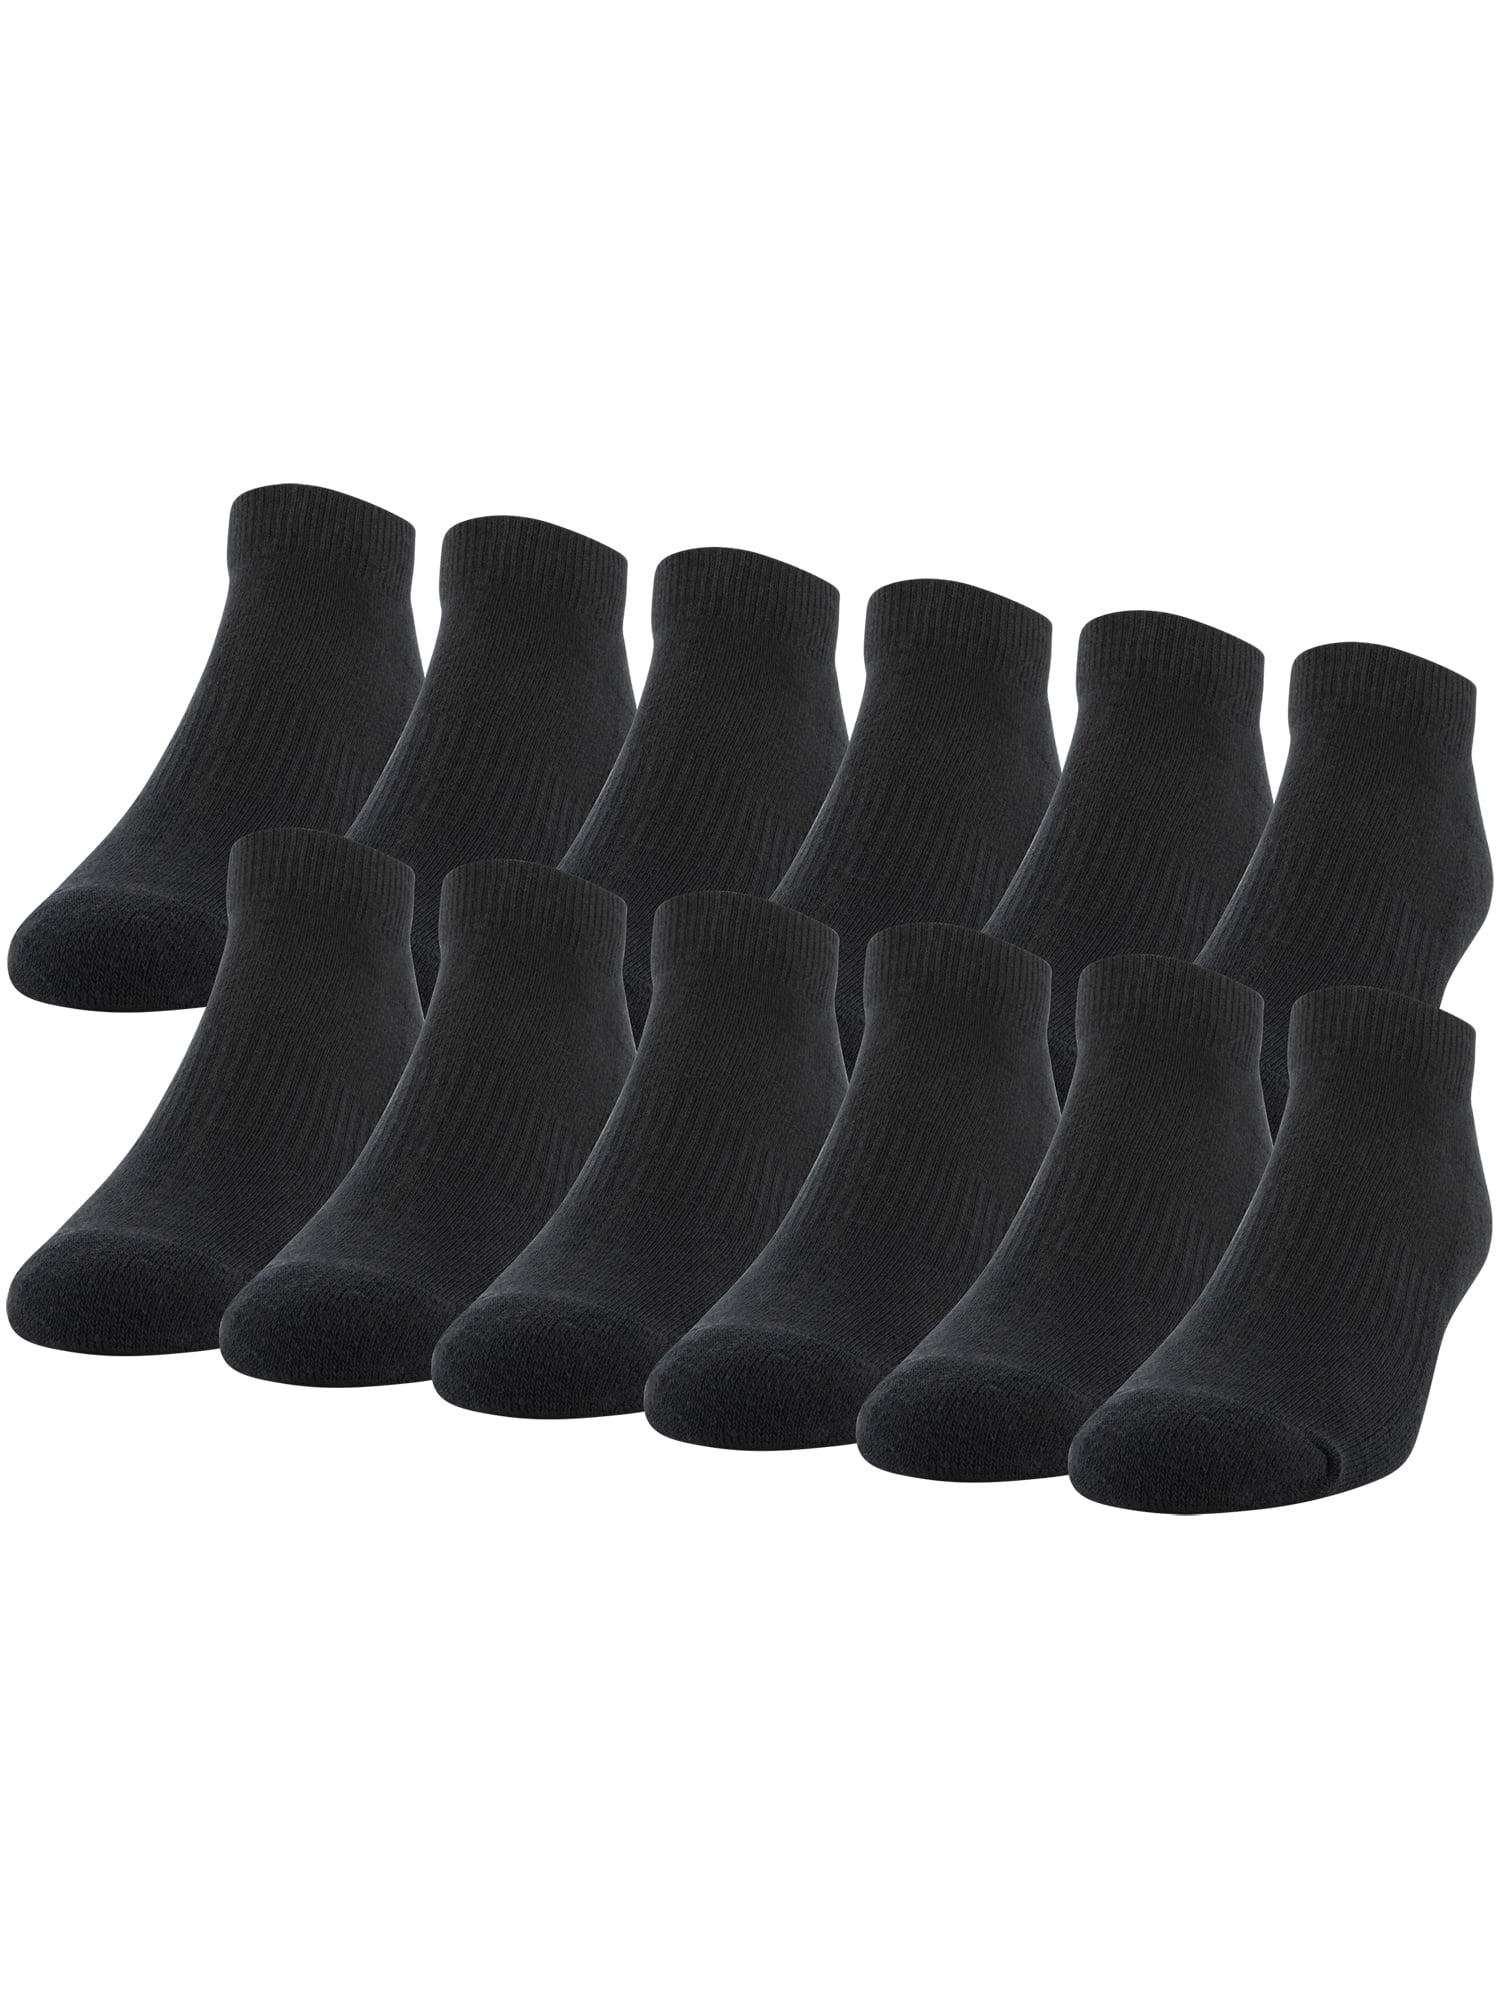 Gildan Adult Mens Performance Cotton Movefx Lowcut Casual Socks Os One Size 12 Pack